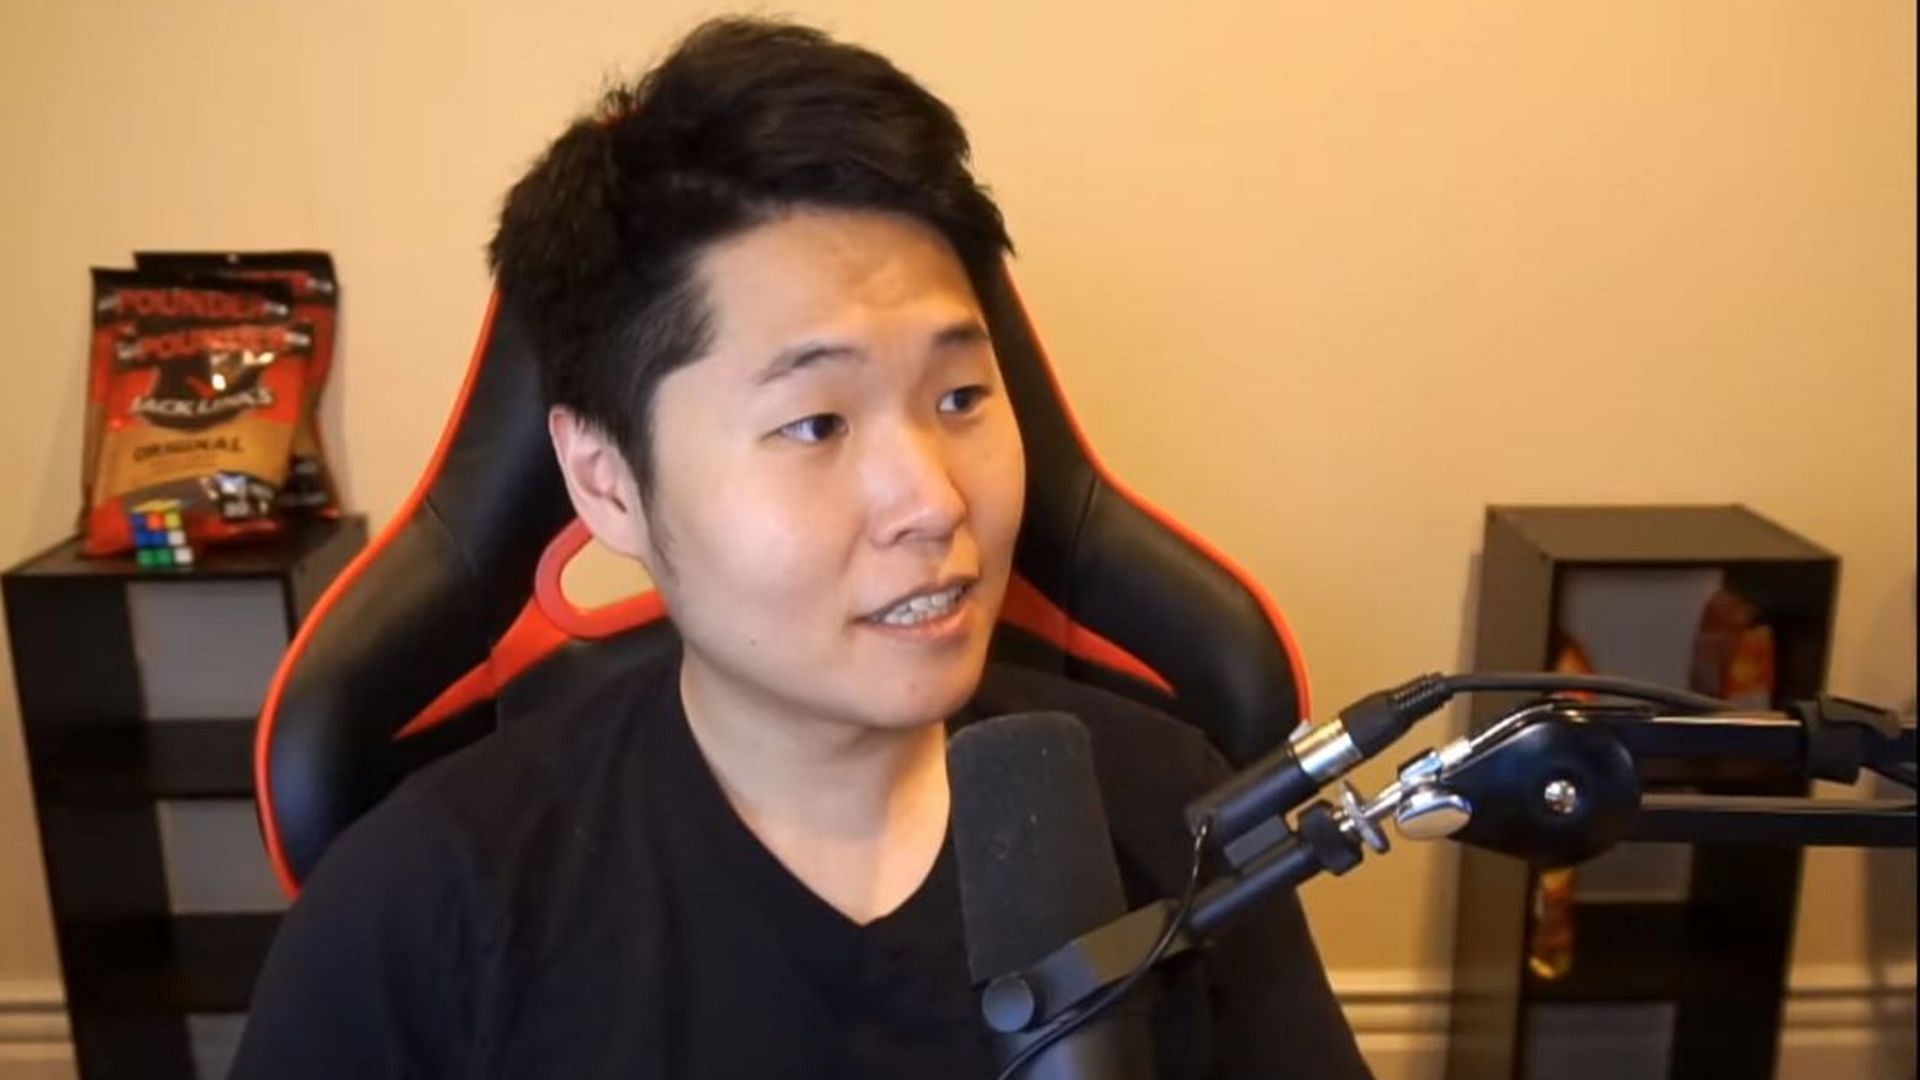 Disguised Toast claimed that most Twitch streamers have hit a content slump (Image via Disguised Toast)